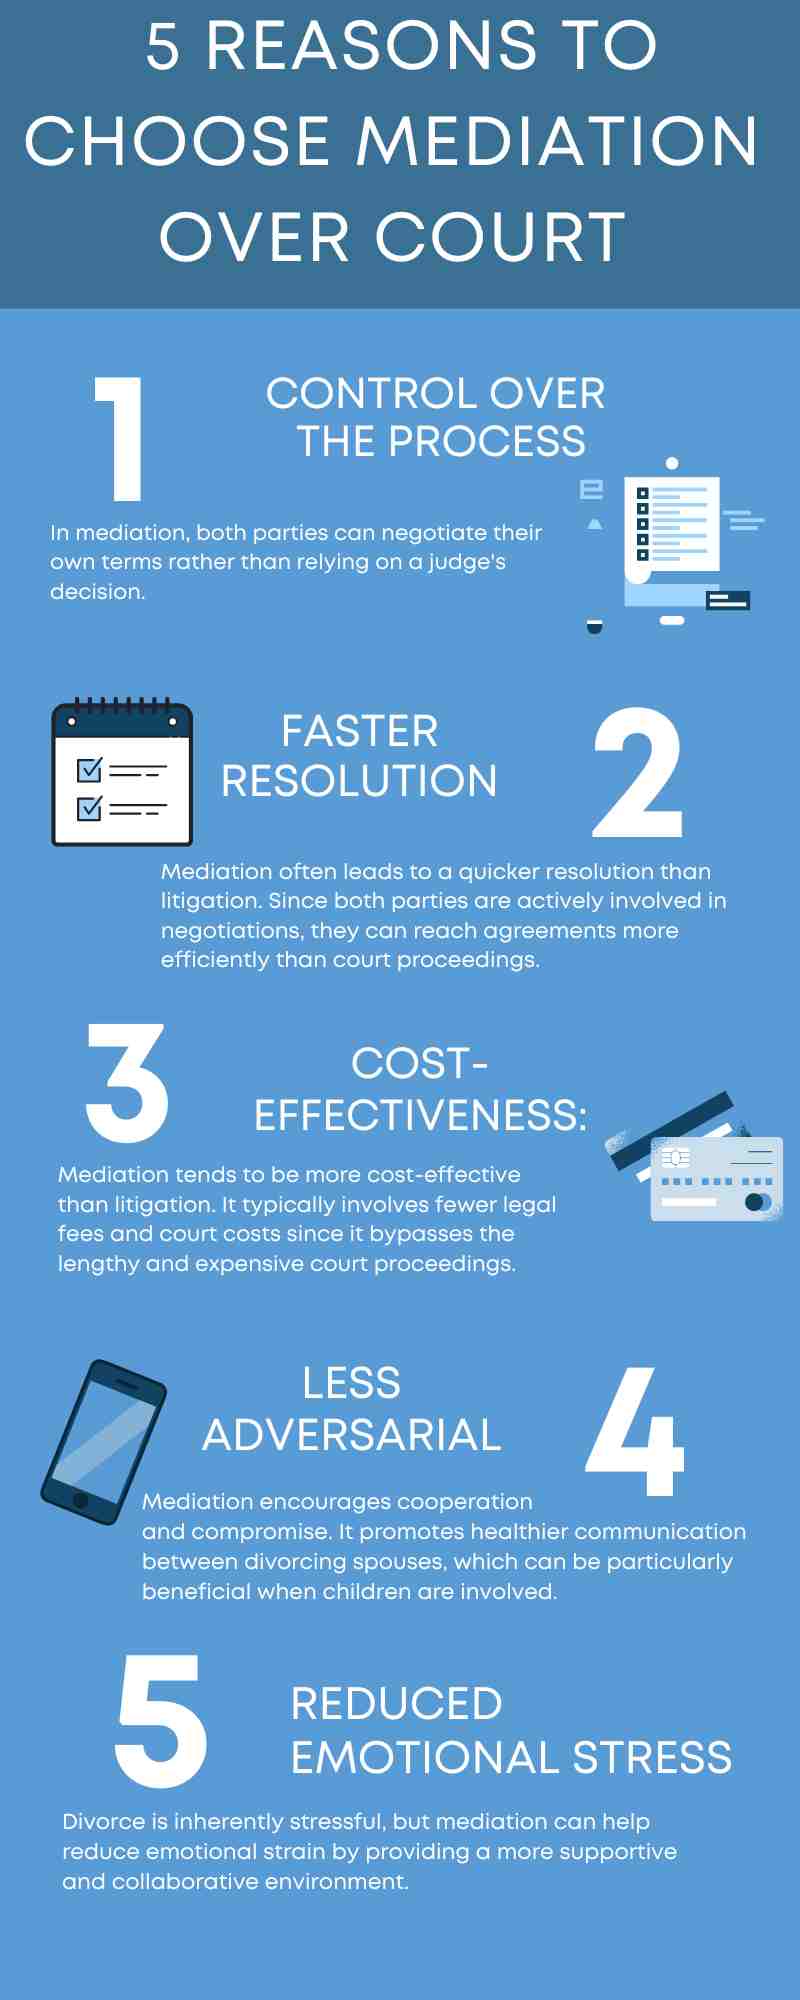 Infographic titled "5 Reasons to Choose Mediation Over Court" with points: 1. Control over the process 2. Faster resolution 3. Cost-effectiveness 4. Less adversarial 5. Reduced emotional stress—a peaceful path, especially beneficial in cases of divorce.